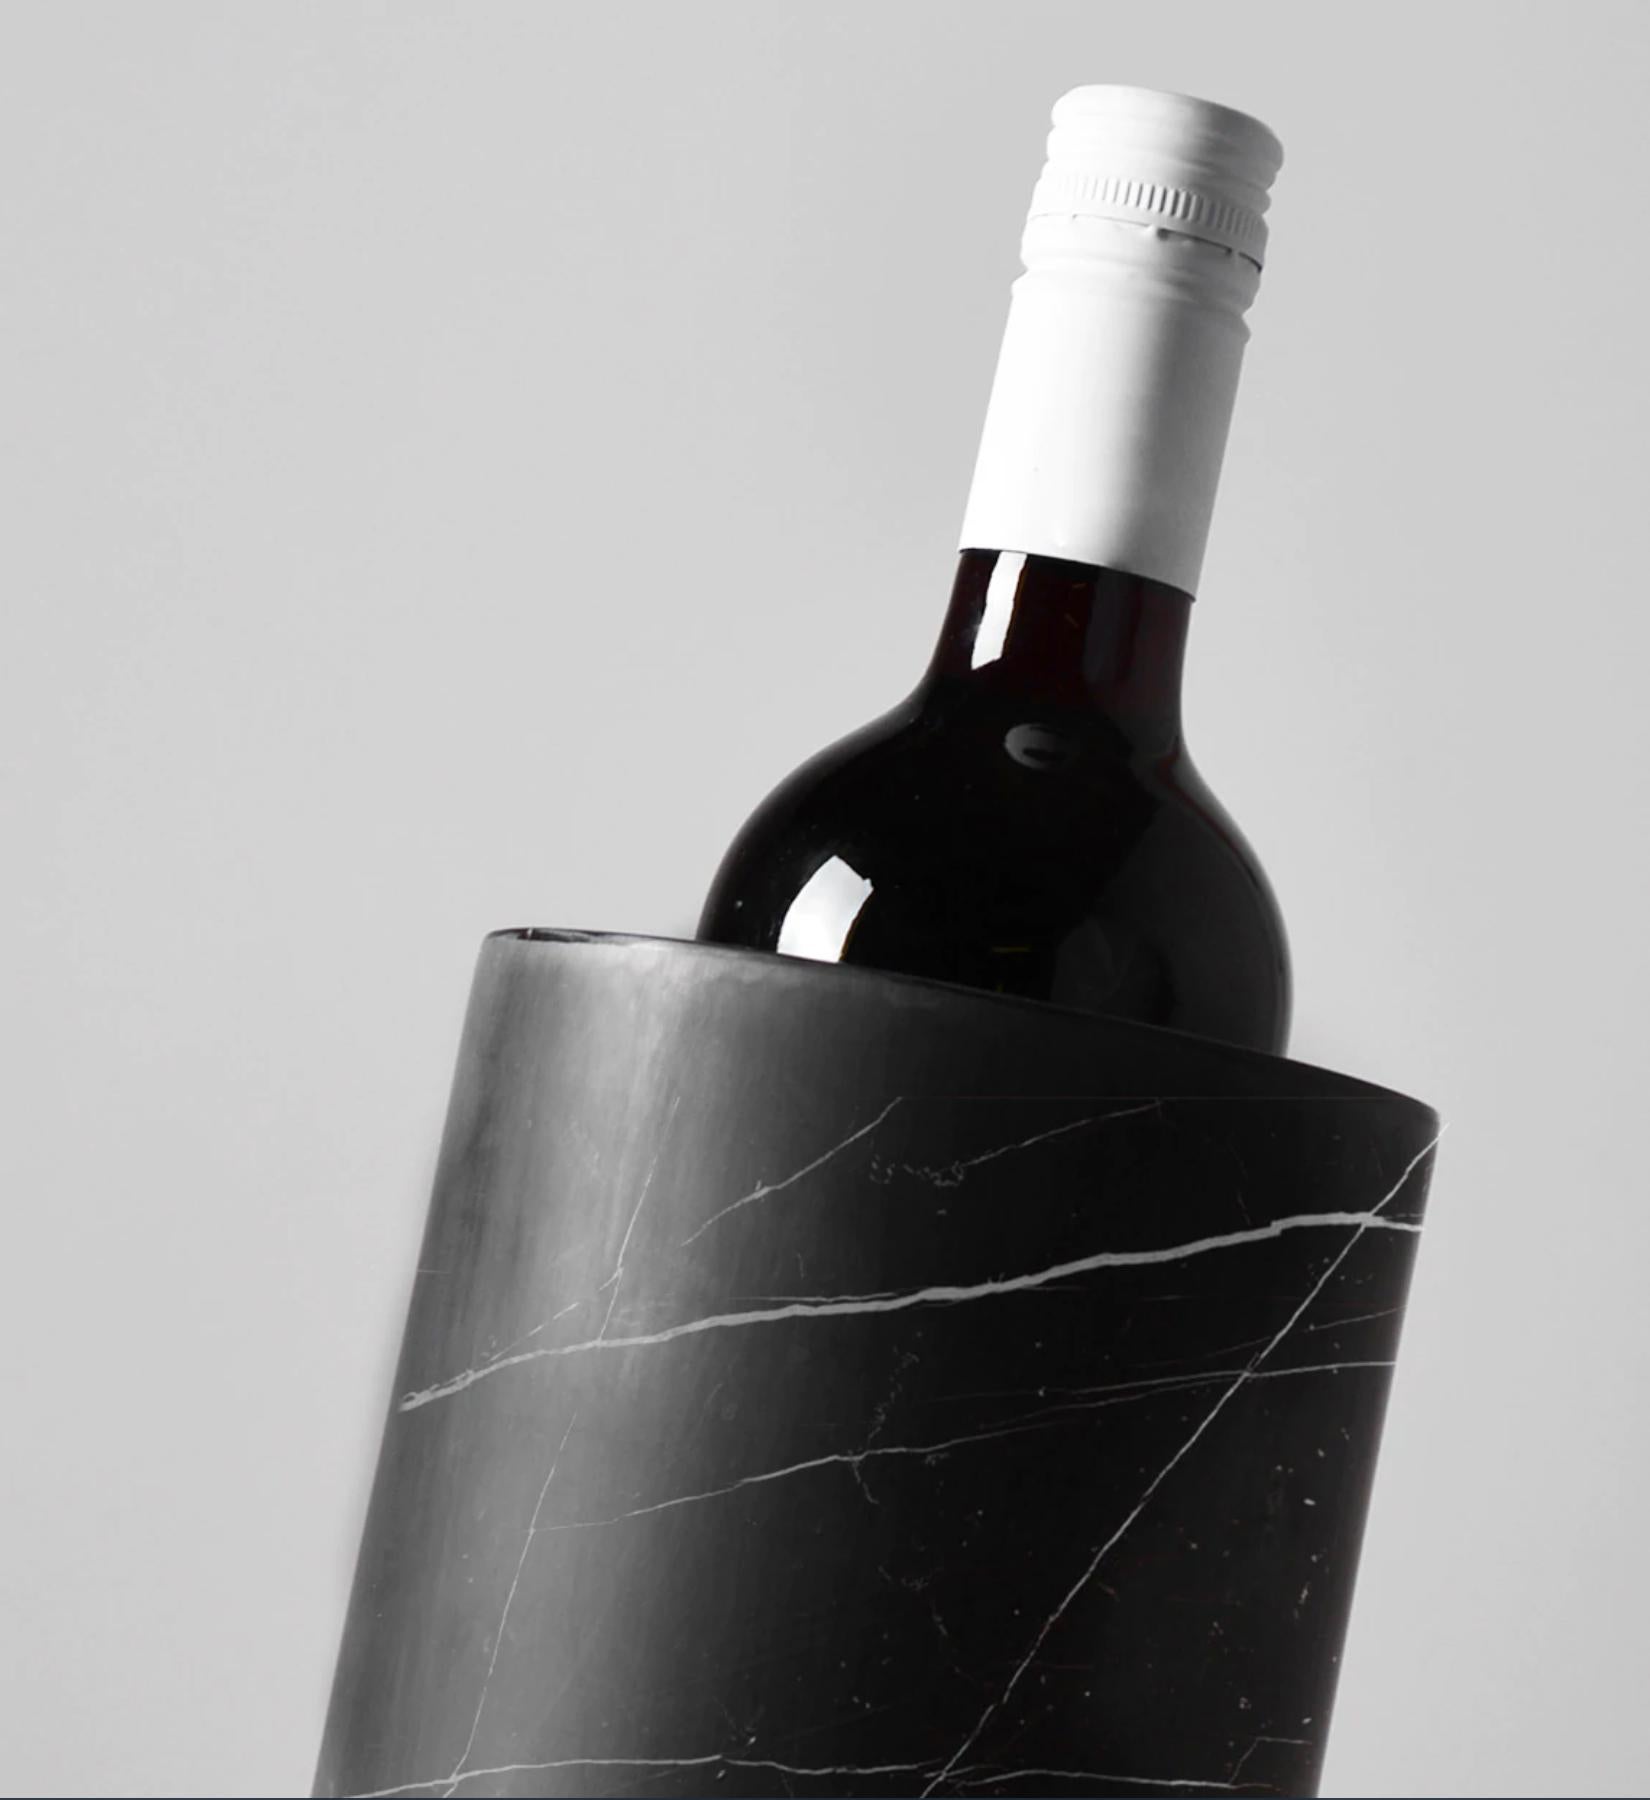 Our wine cooler is designed by us and hand crafted by the artisans within the fair-trade principles.

The natural properties of the marble will keep your wine chilled with no need for ice - you can also place this marble cooler in the fridge for an